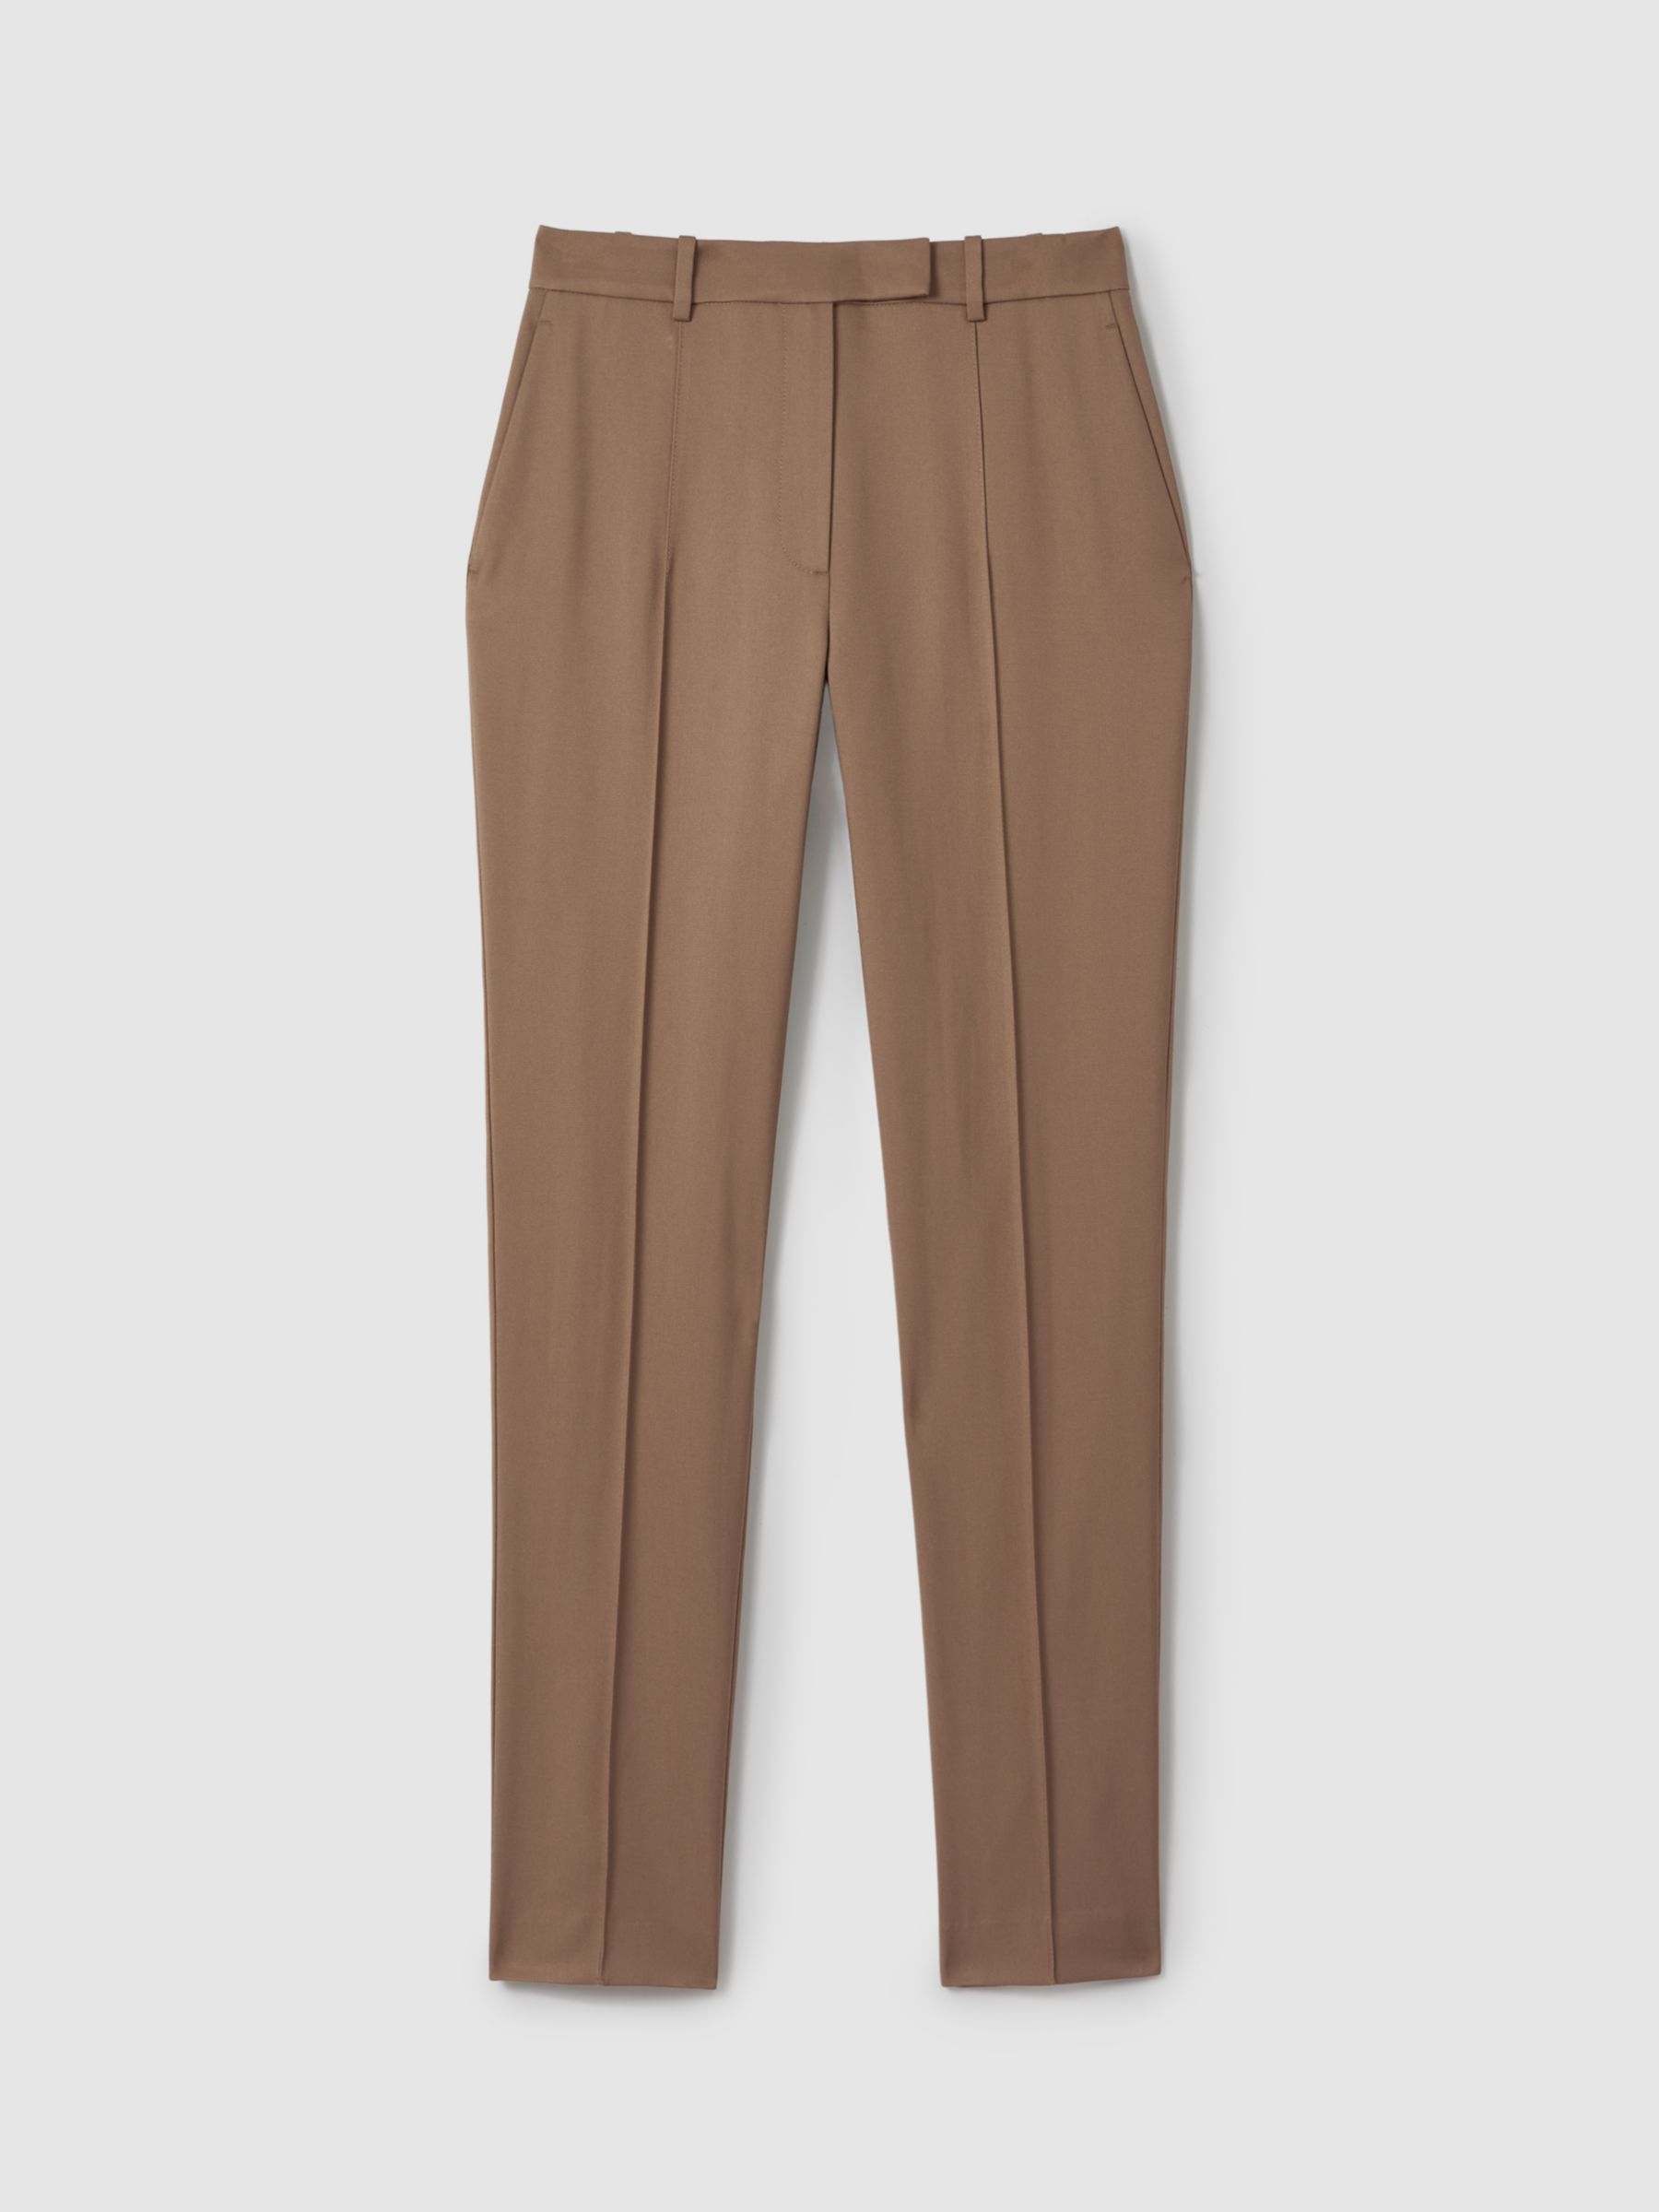 Reiss Navy Haisley Tailored Flared Suit Trousers